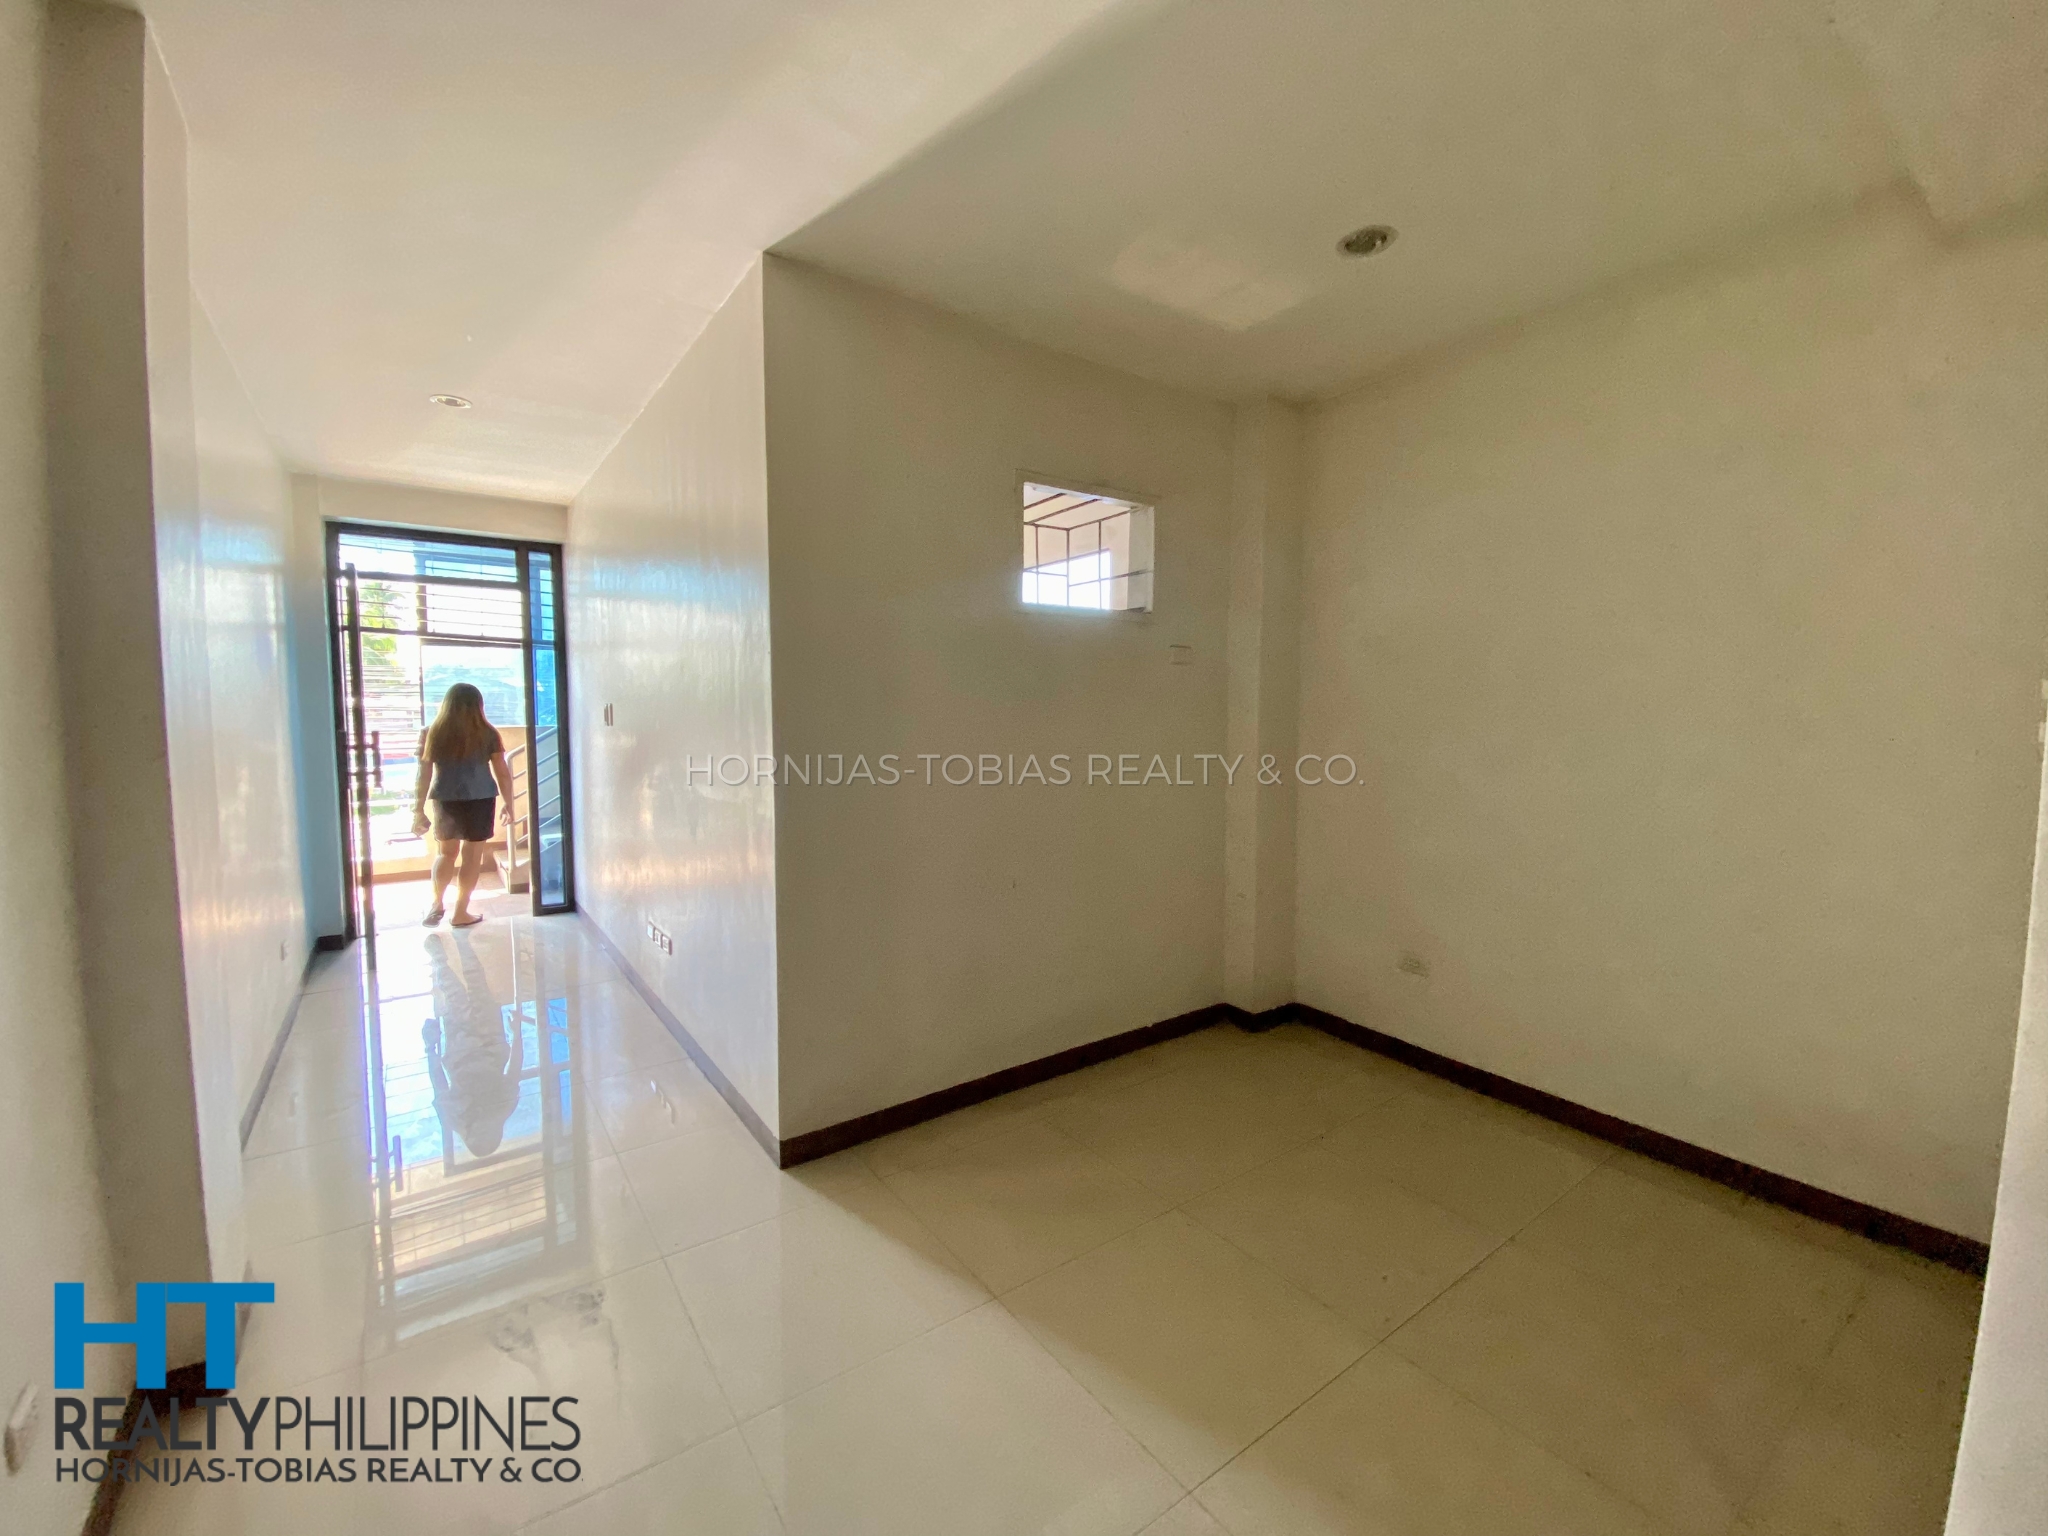 inside - 4-storey commercial building for sale in Quezon Boulevard Davao City